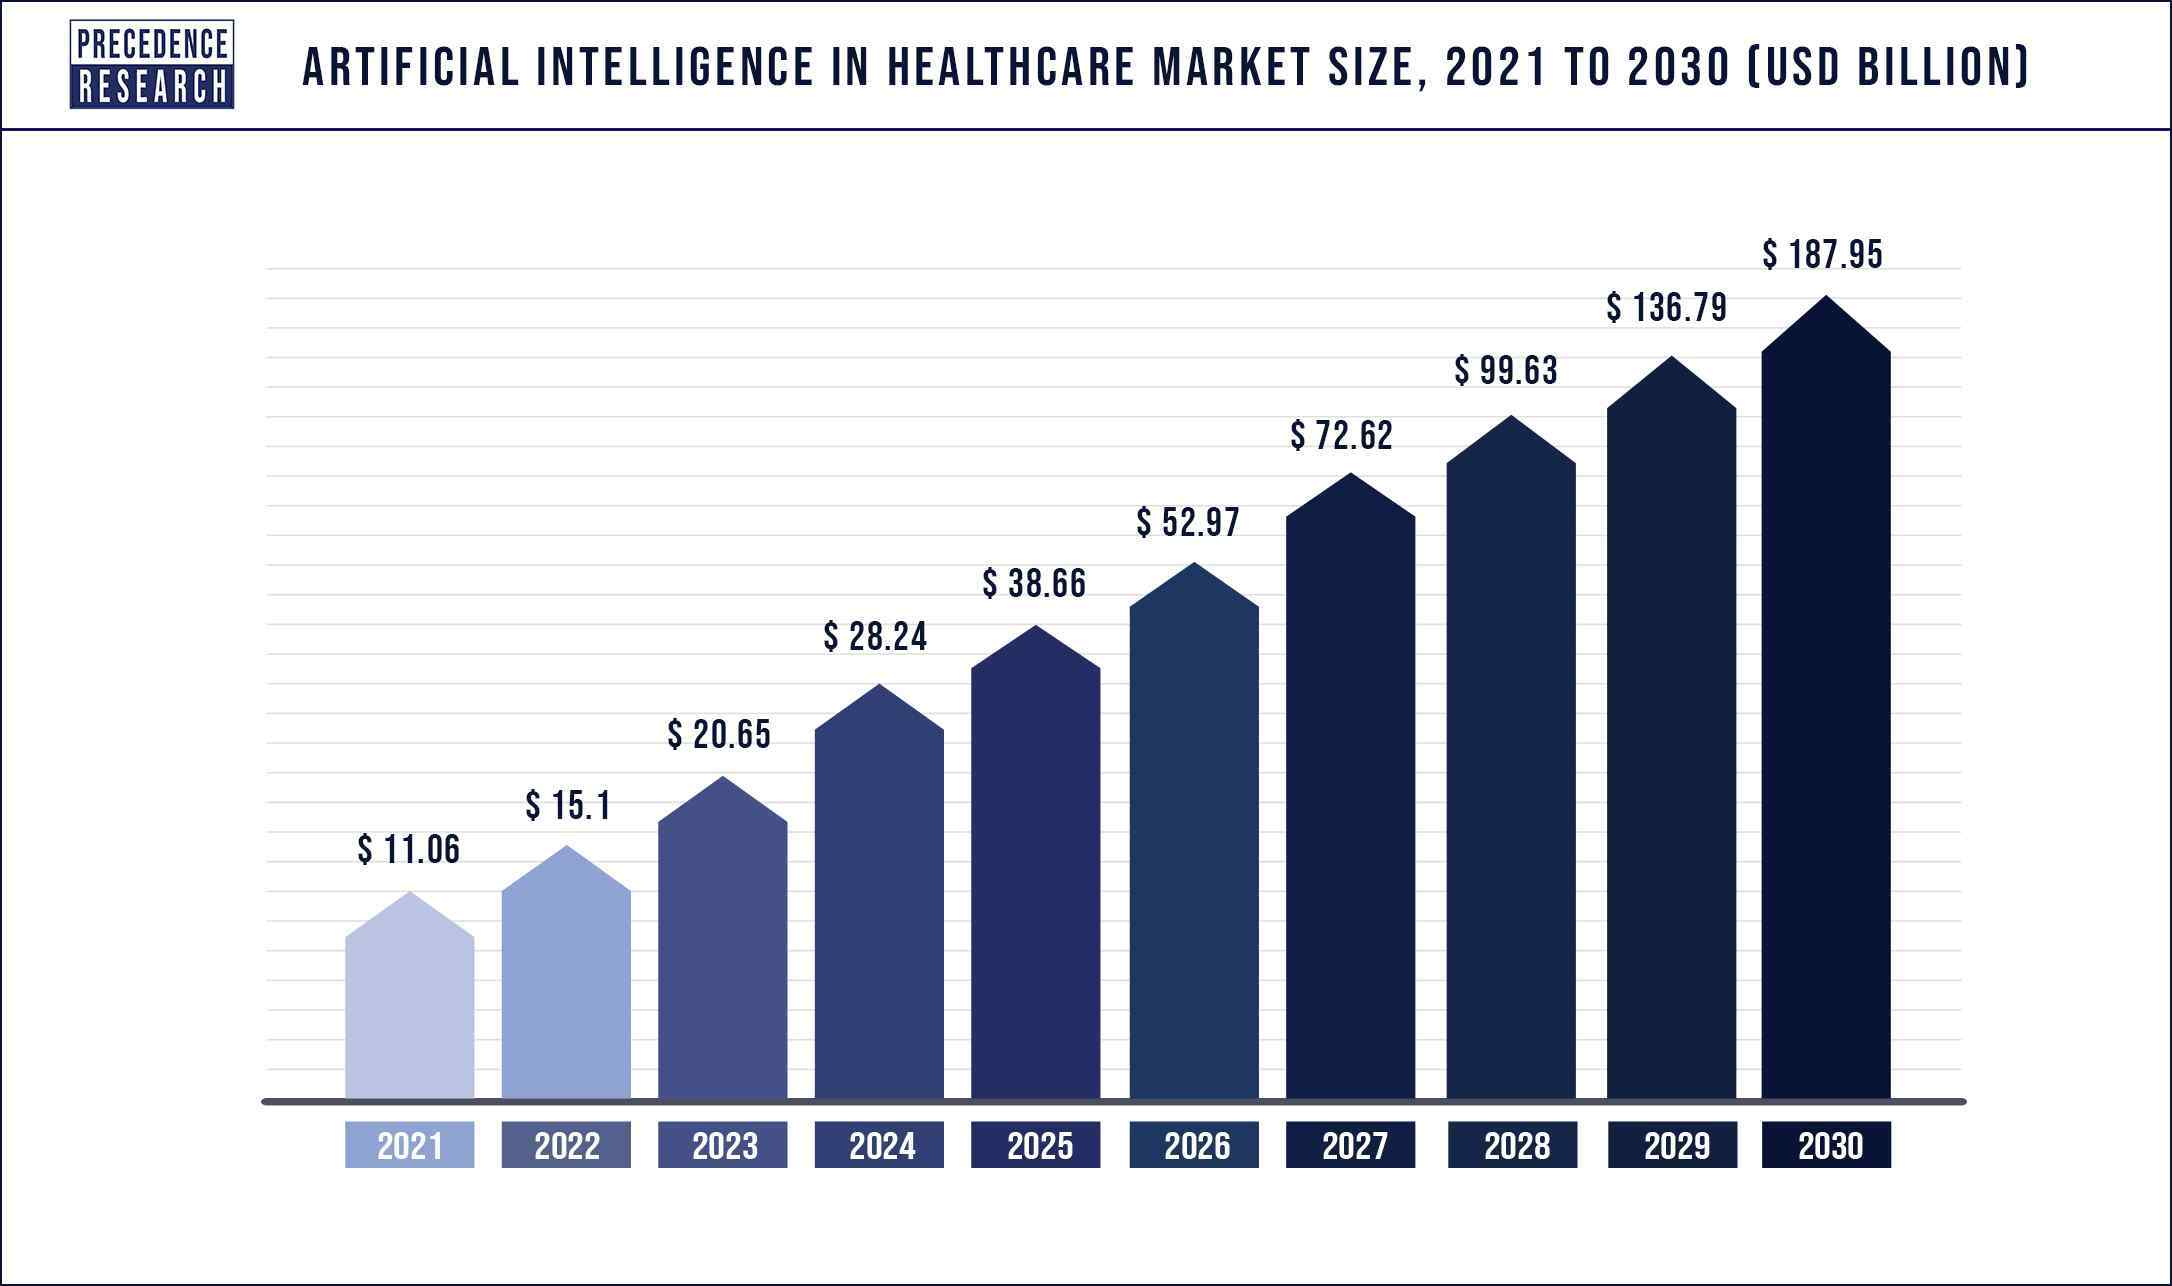 Artificial Intelligence in Healthcare Market Size 2021 to 2030